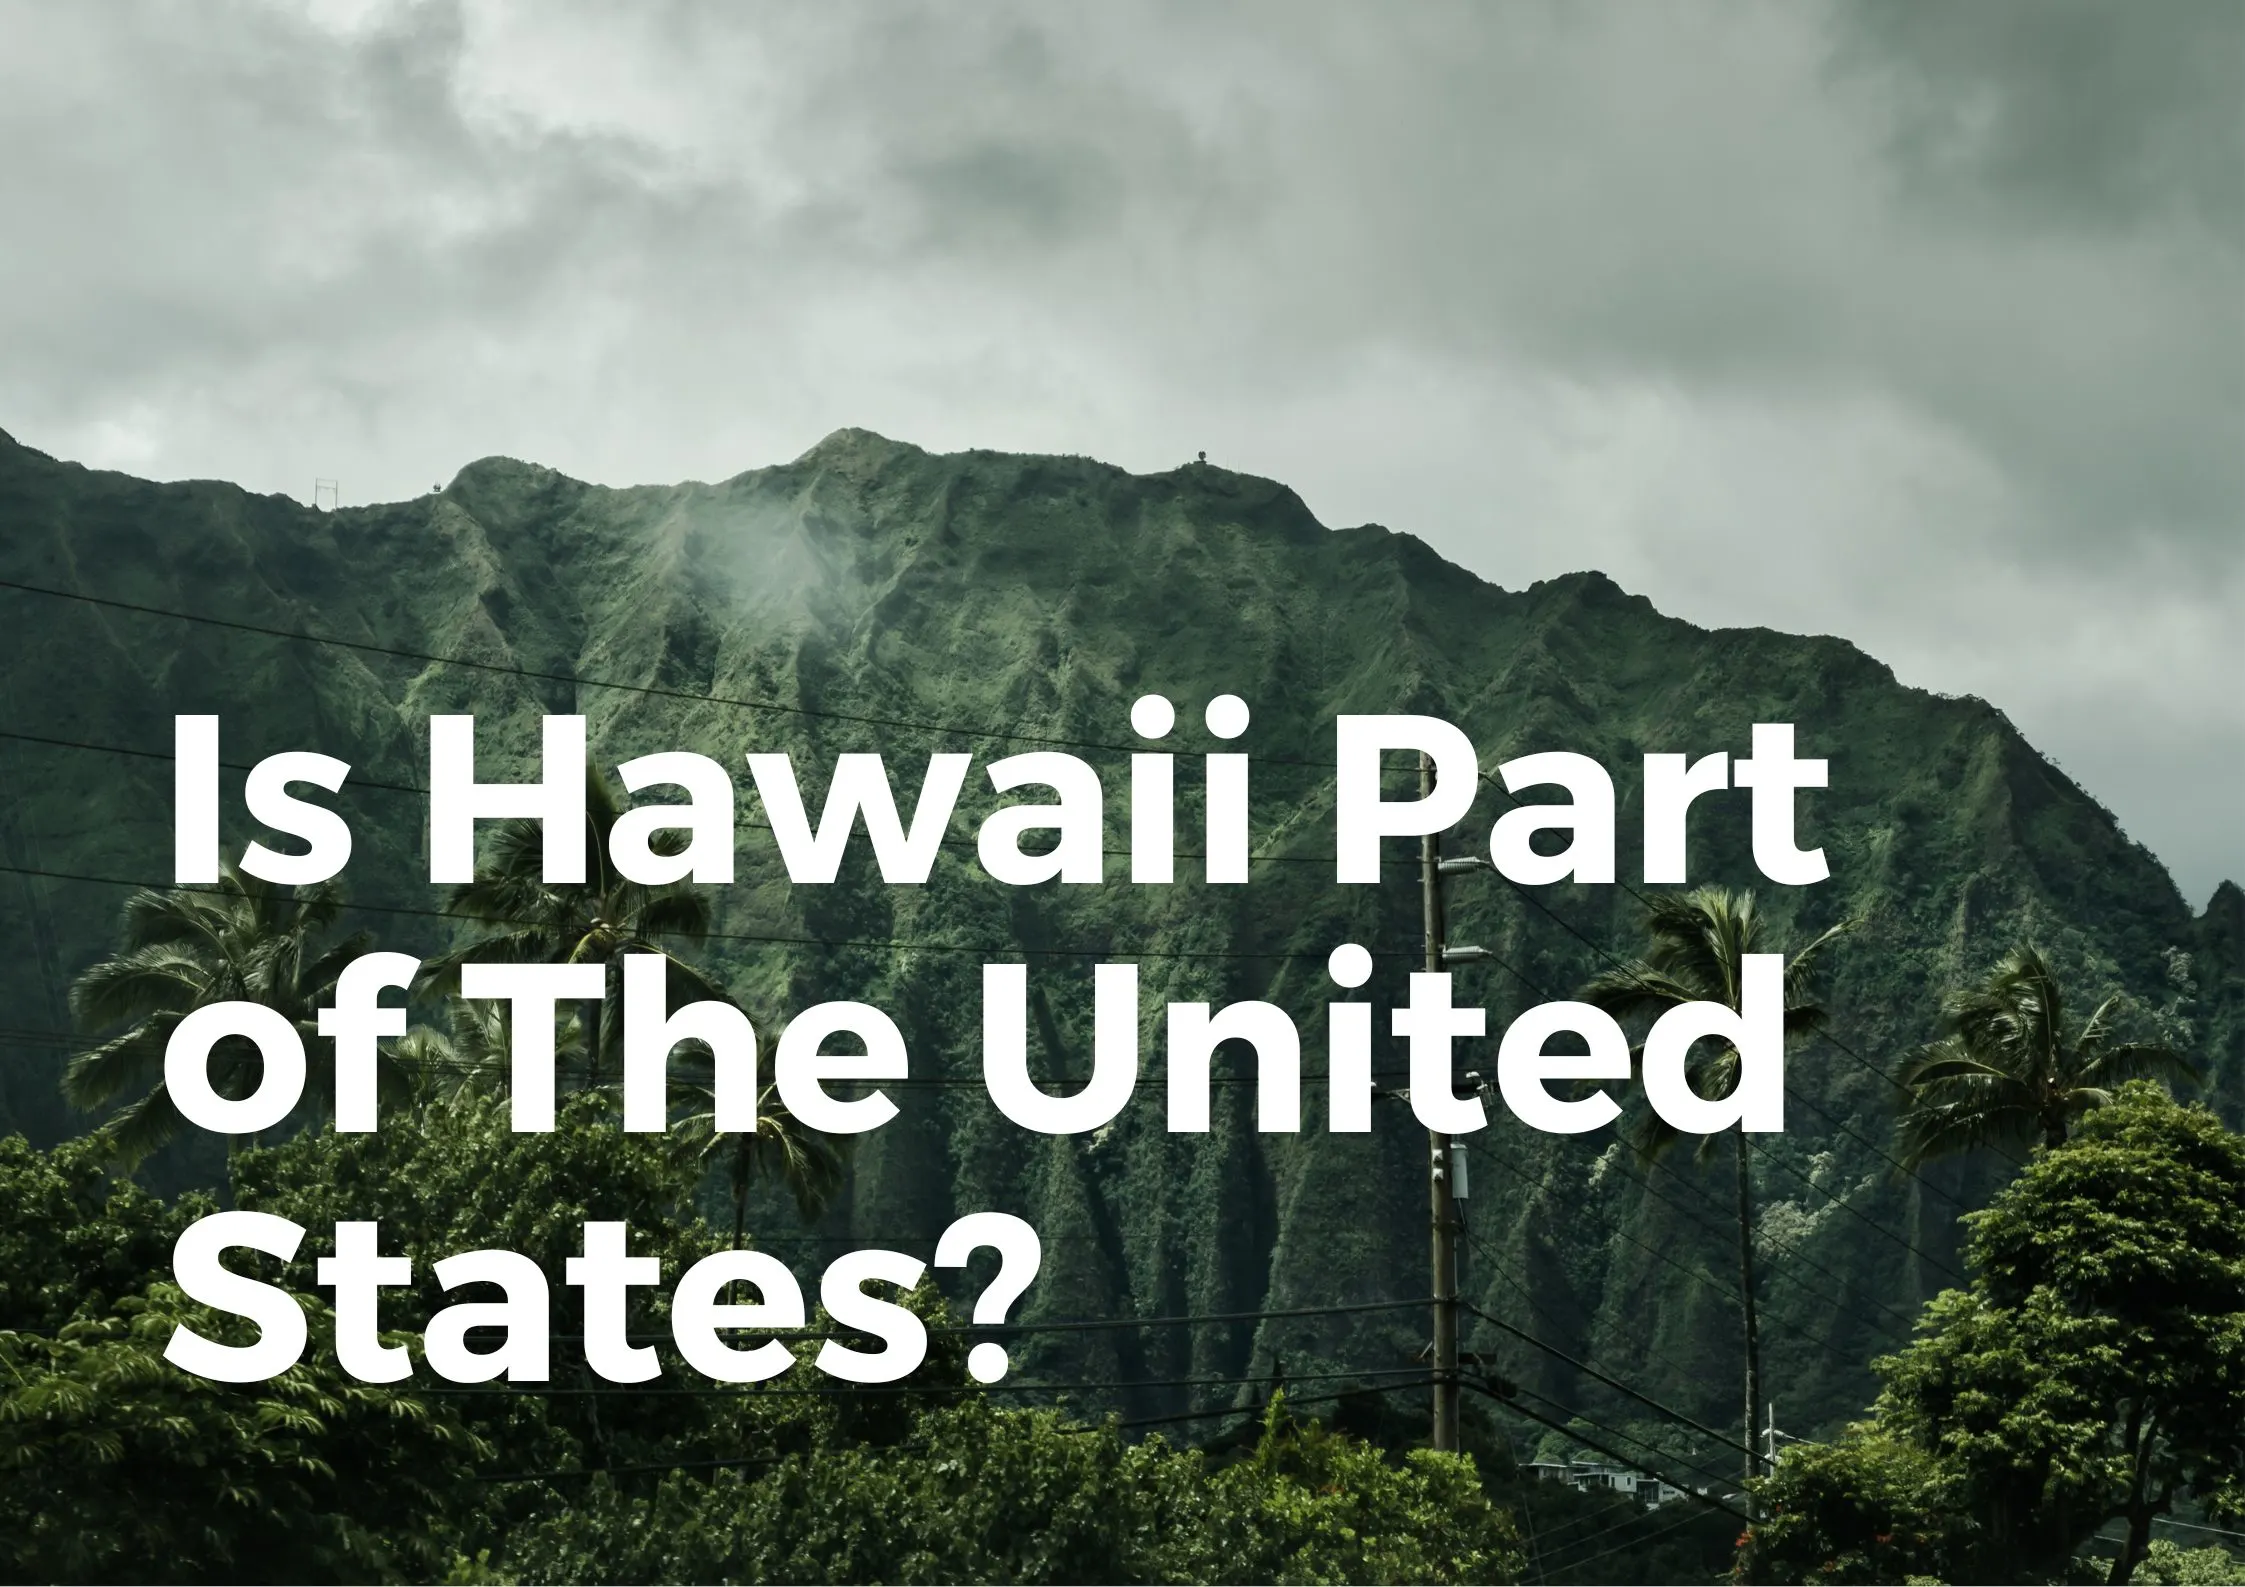 Is Hawaii part of the united states